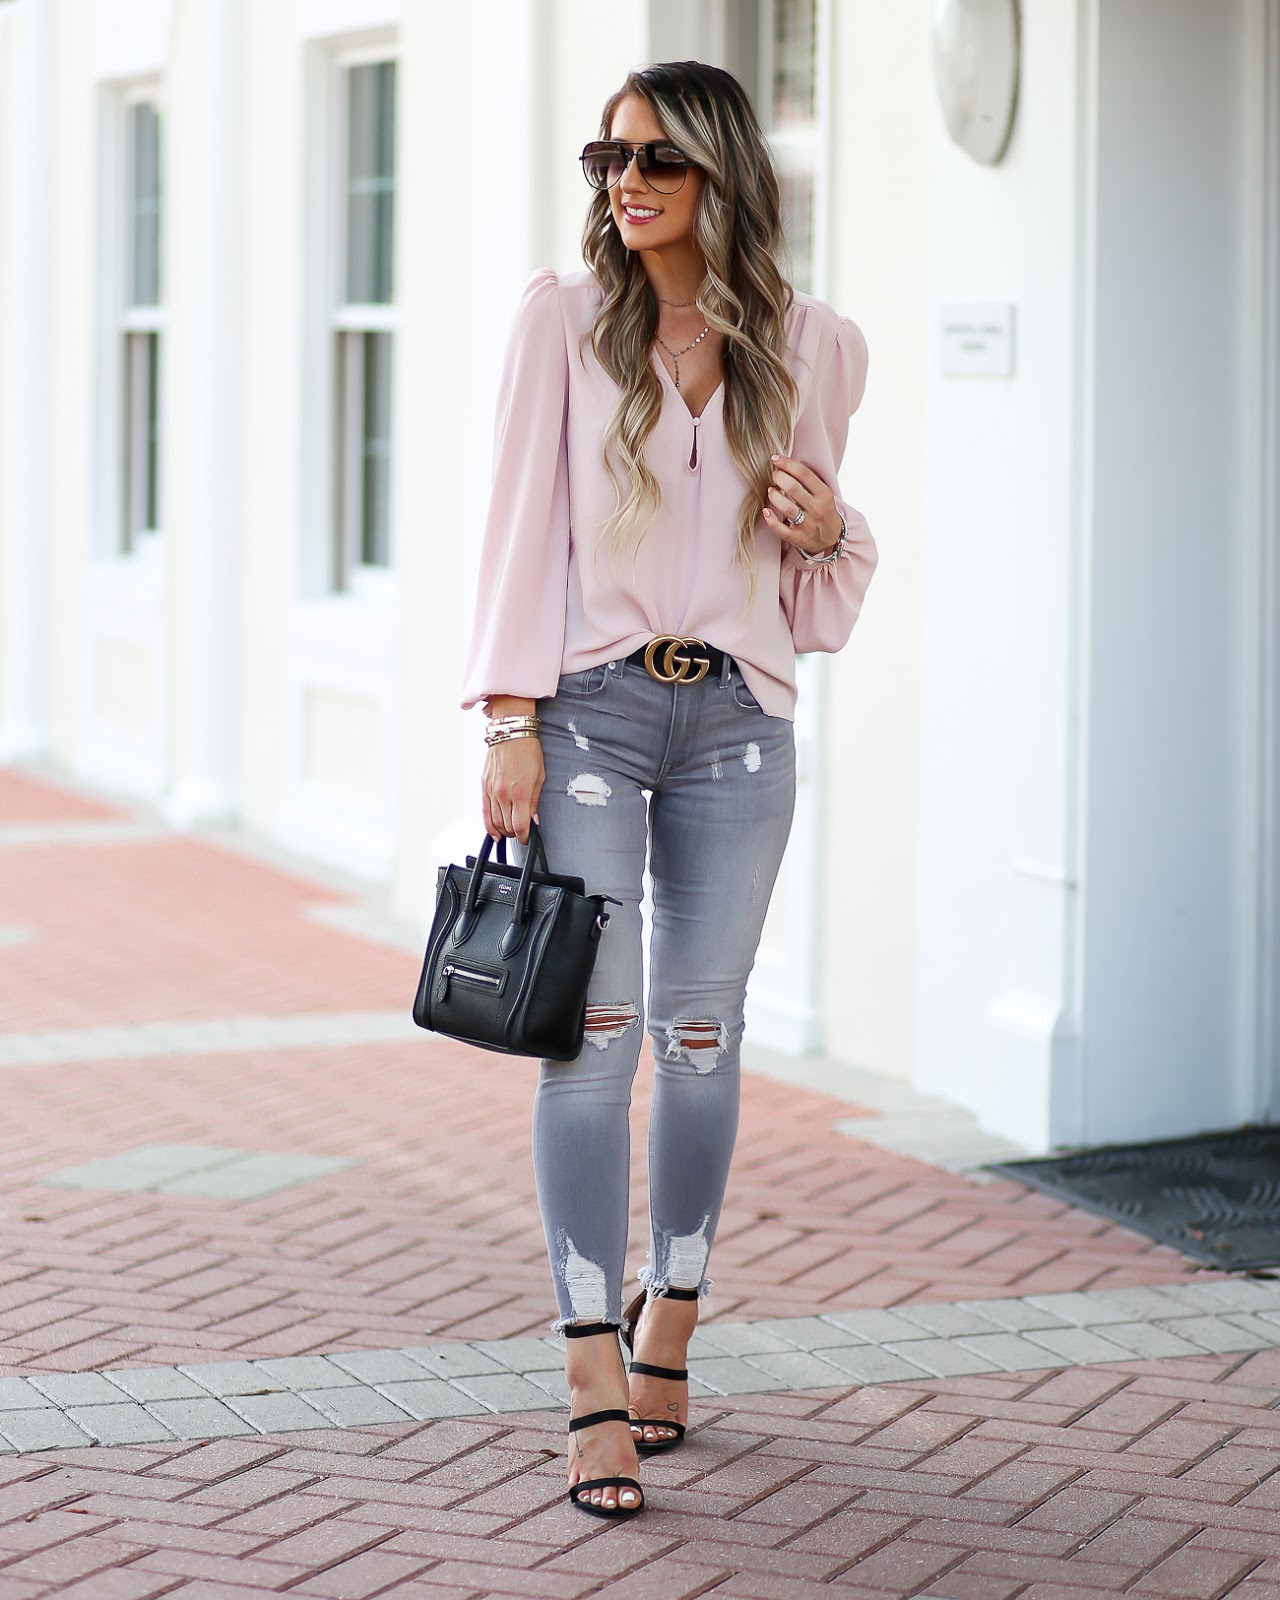 Casual Chic Style: Blush & Gray - Laura Beverlin